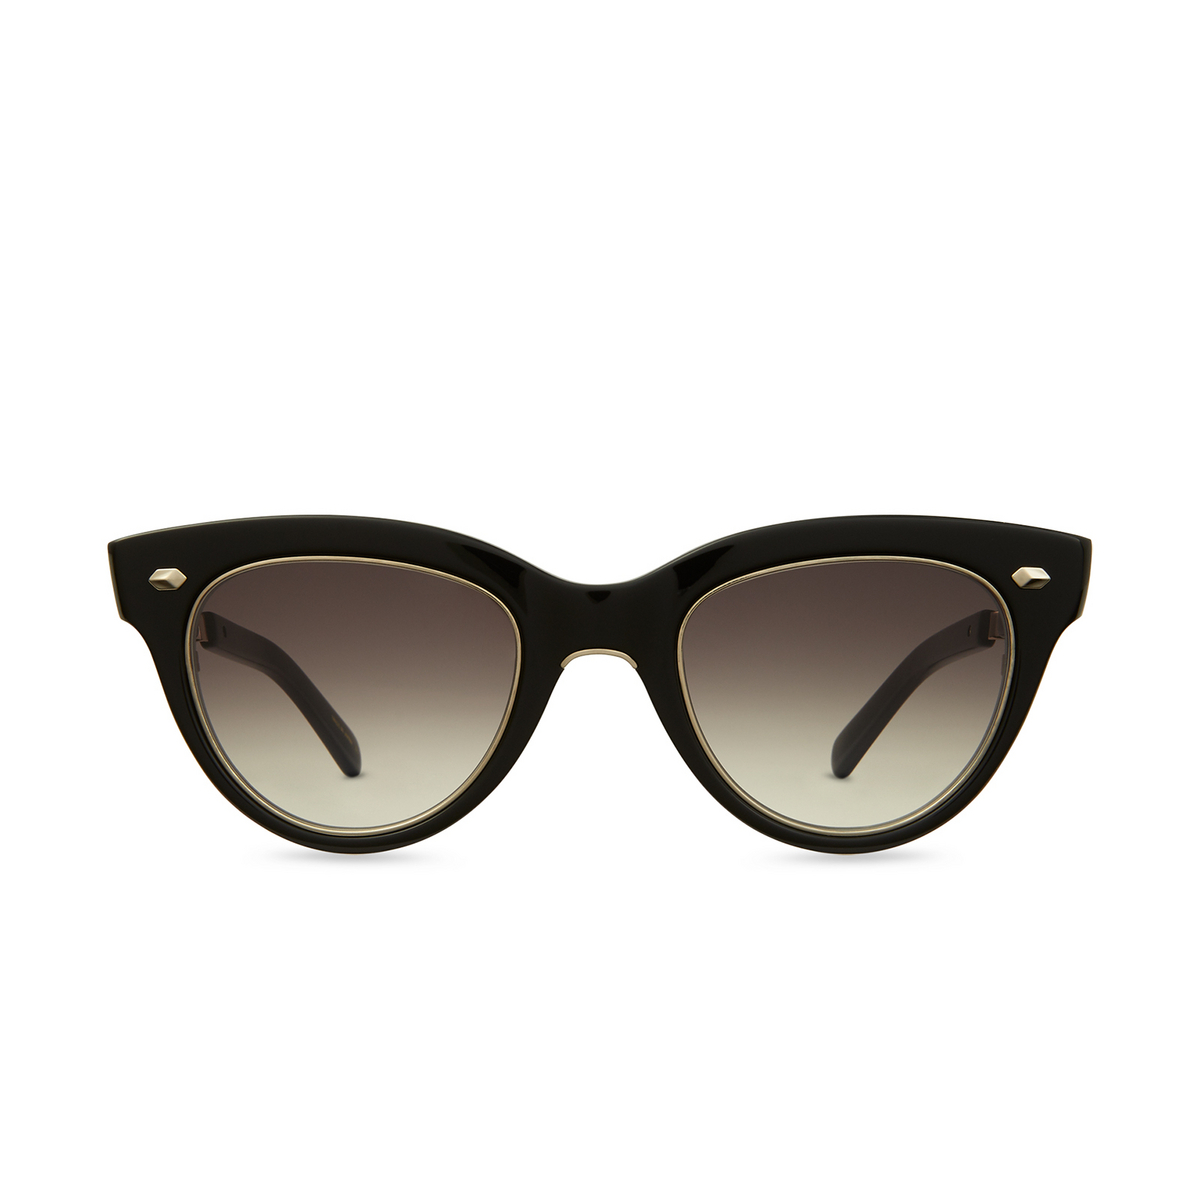 Mr. Leight® Cat-eye Sunglasses: Madison S color BK-12KG/SFBKG - front view.